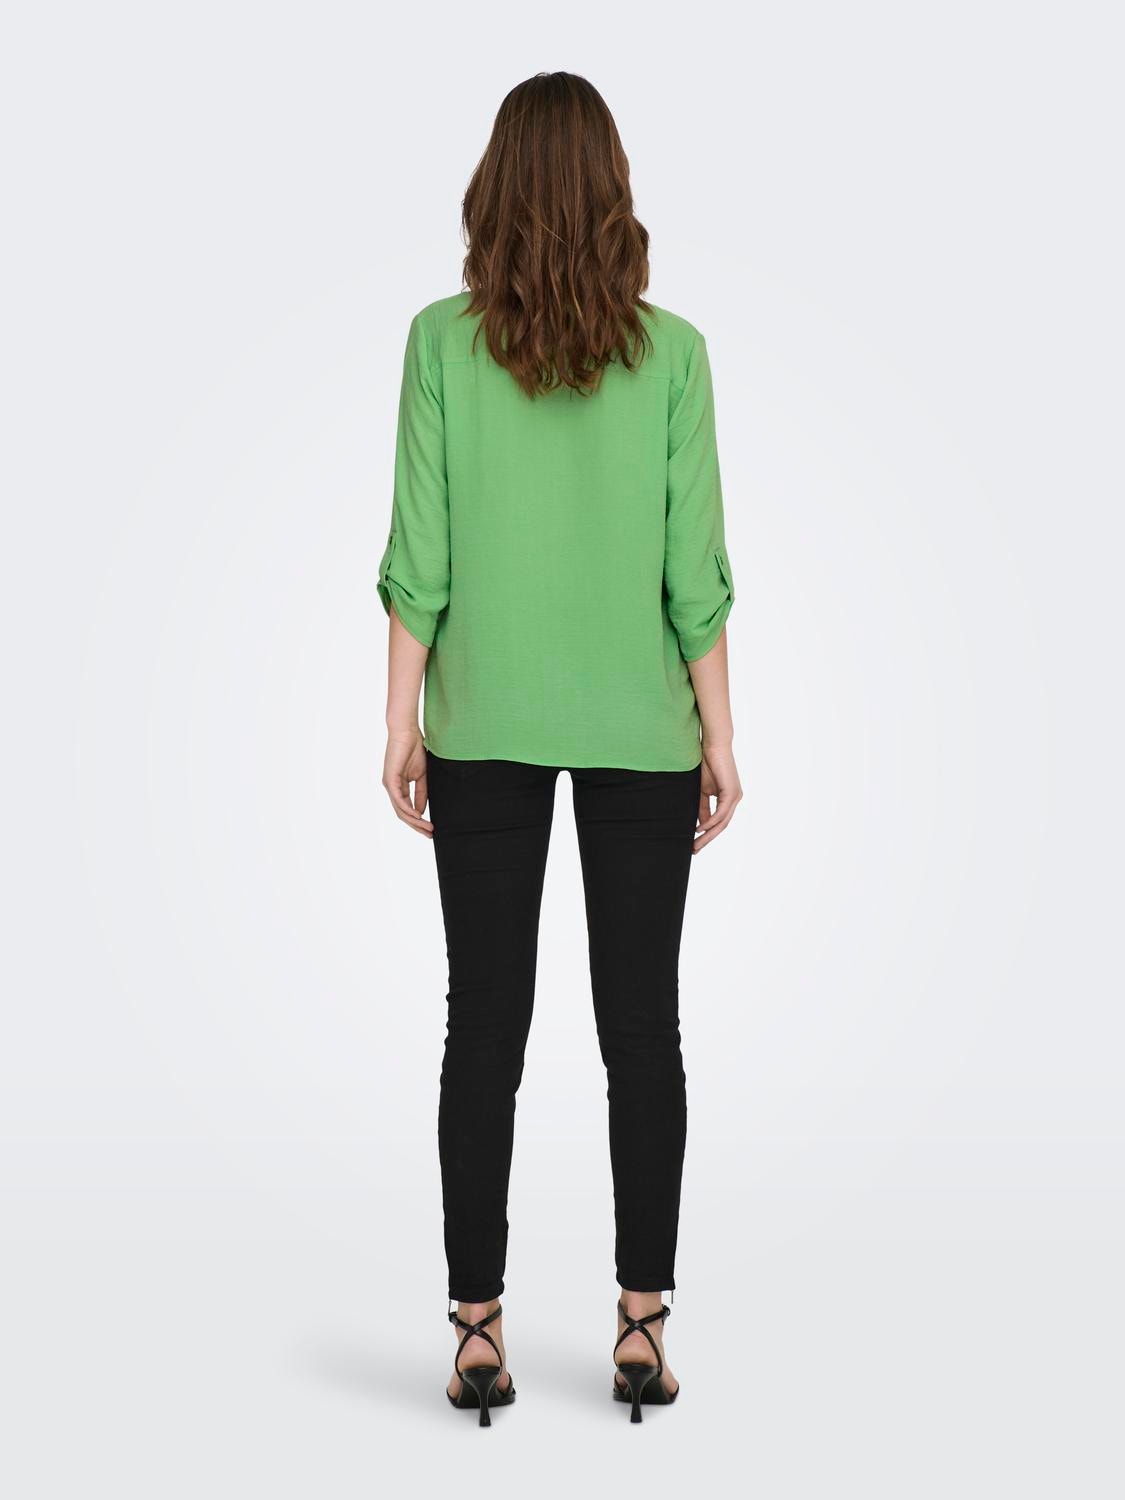 ONLY Solid colored 3/4 sleeved top -Absinthe Green - 15226911